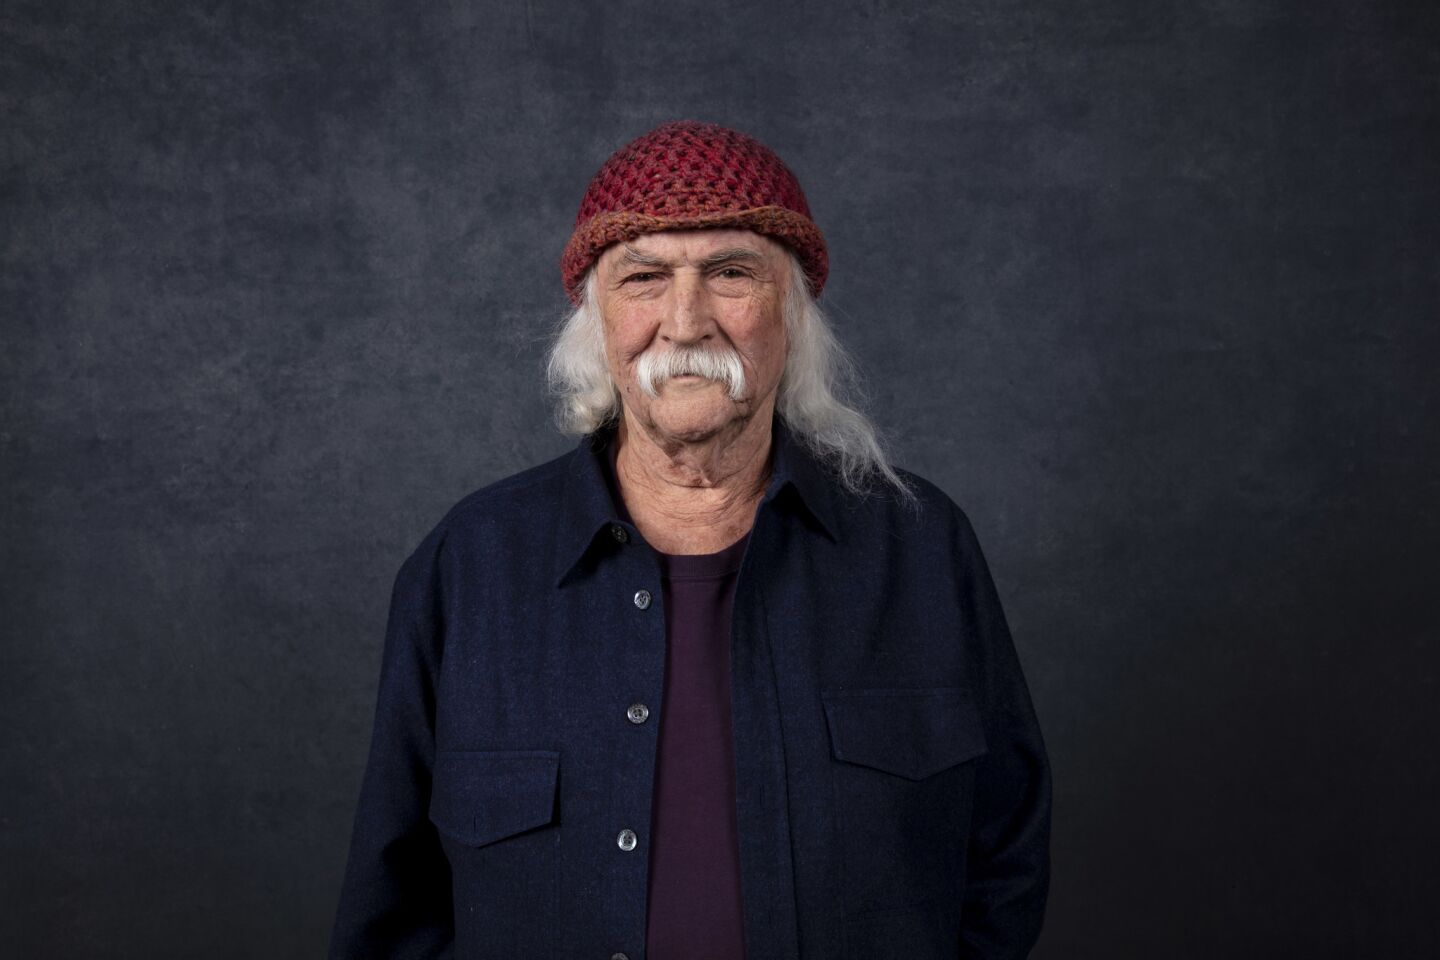 Subject David Crosby, from the documentary "David Crosby: Remember My Name," photographed at the 2019 Sundance Film Festival in Park City, Utah, on Friday, Jan. 25.